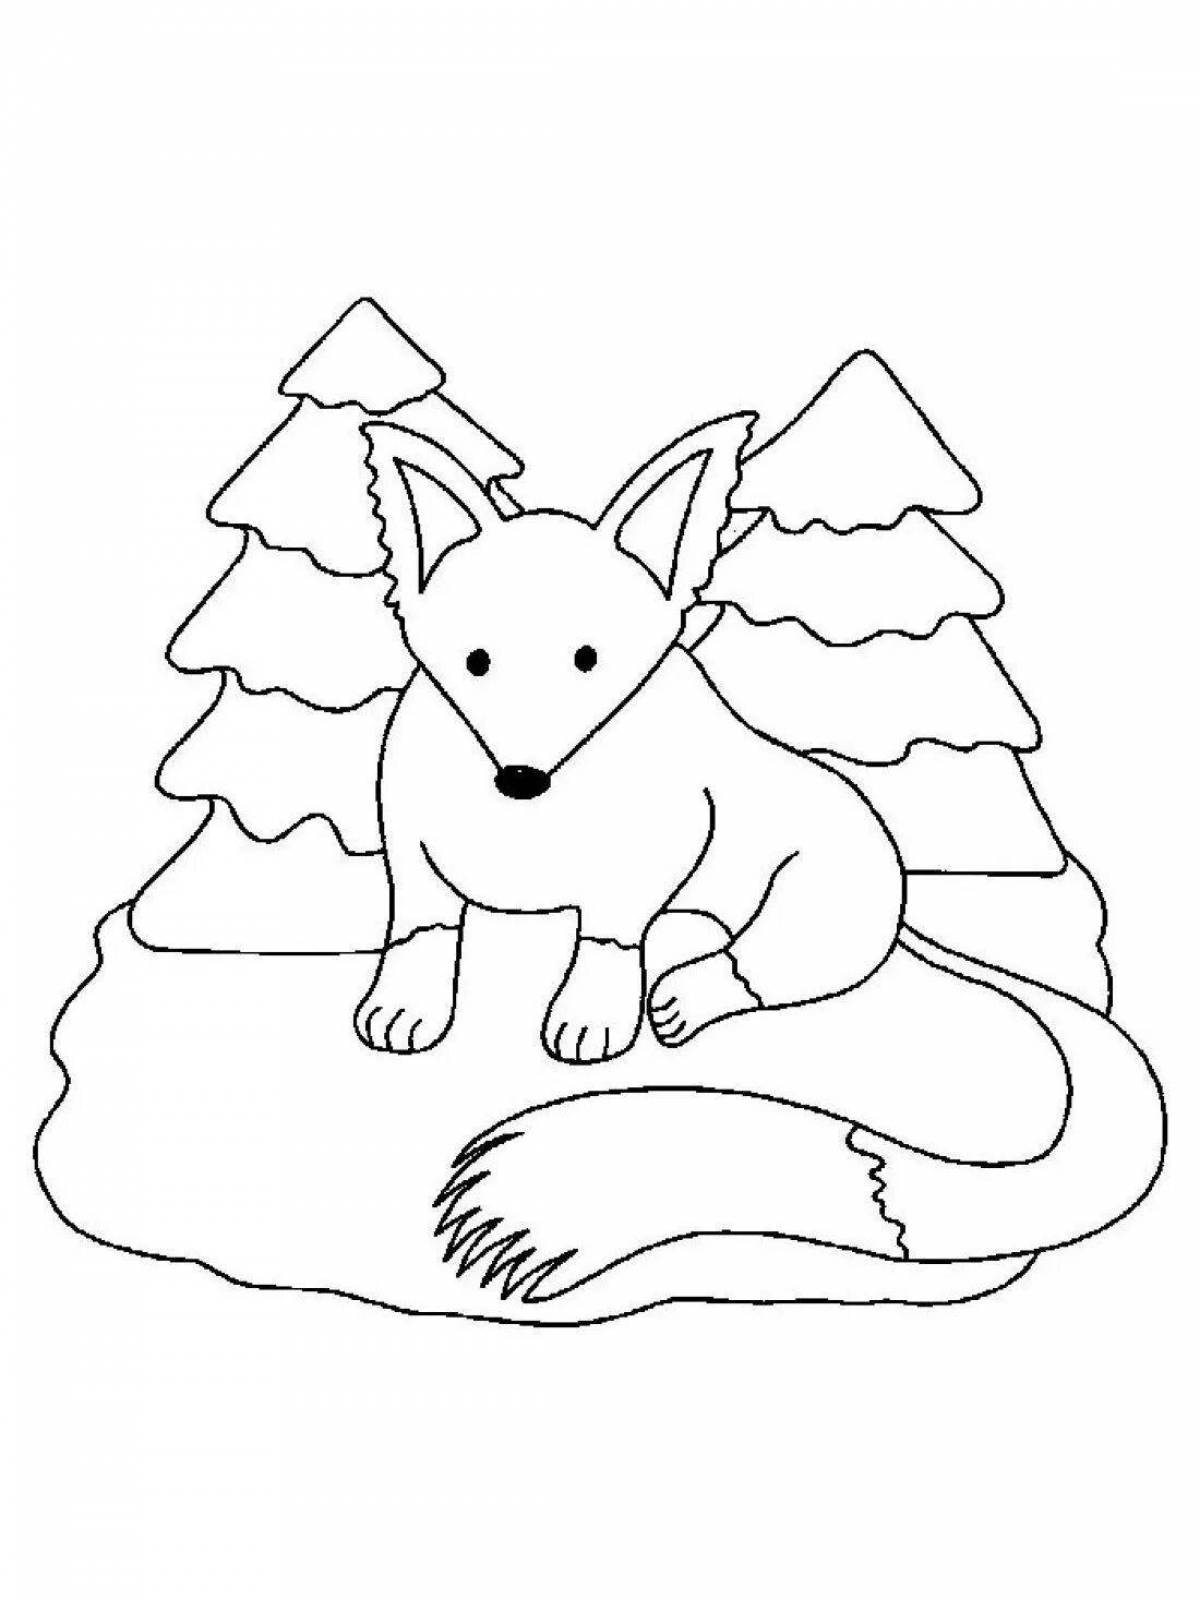 Exciting winter animal coloring book for kids